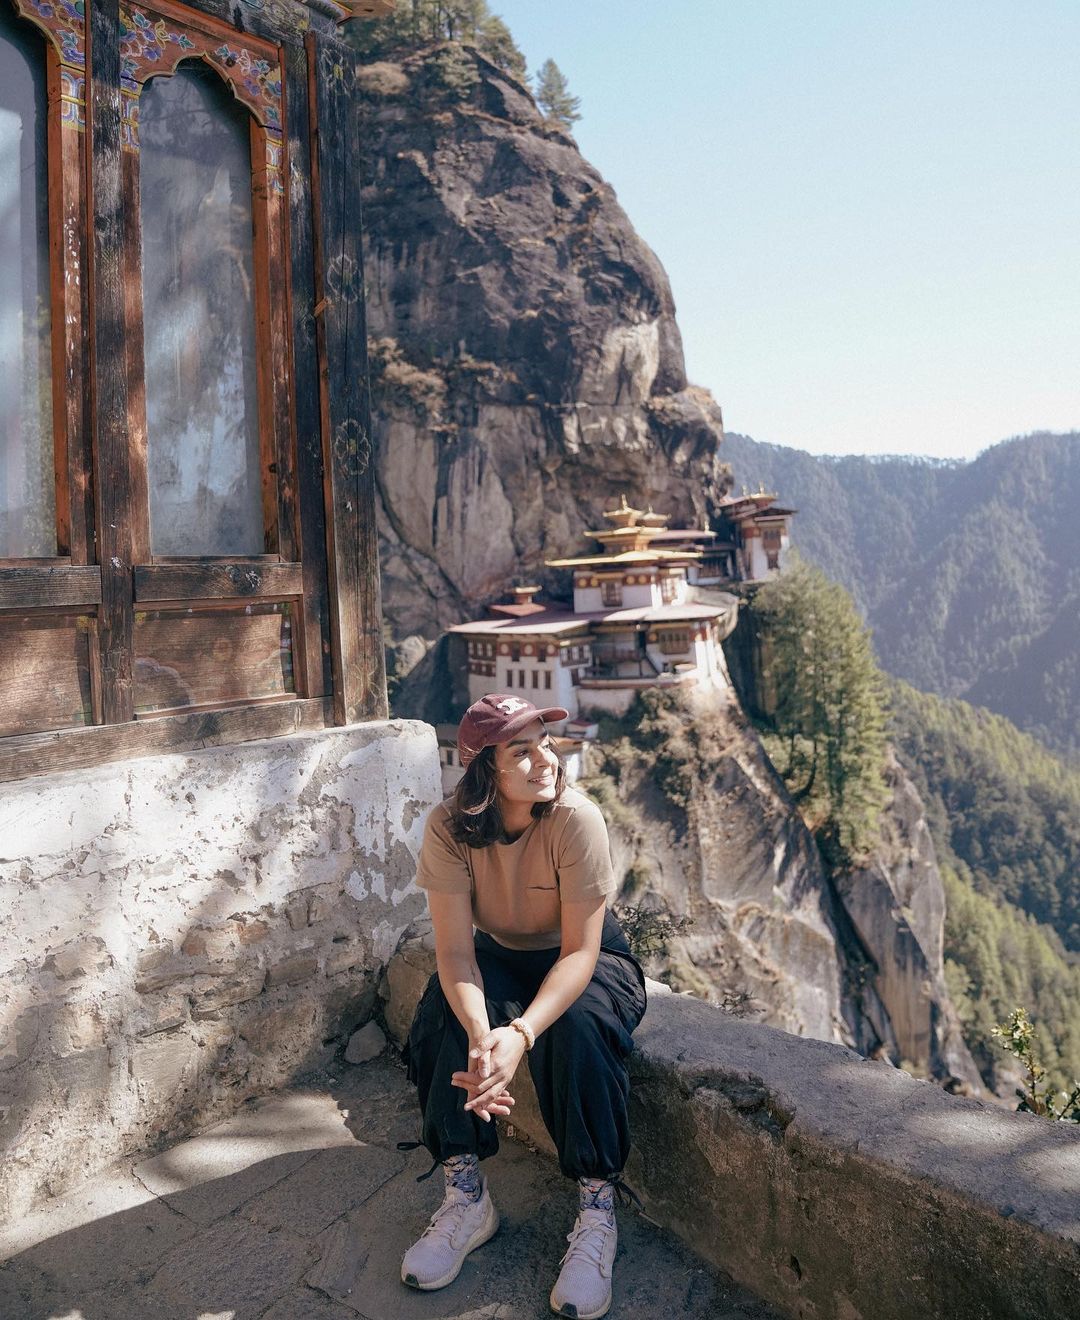 Tiger's Nest, Paro, Bhutan - 30 Trips to Take in Your 30s